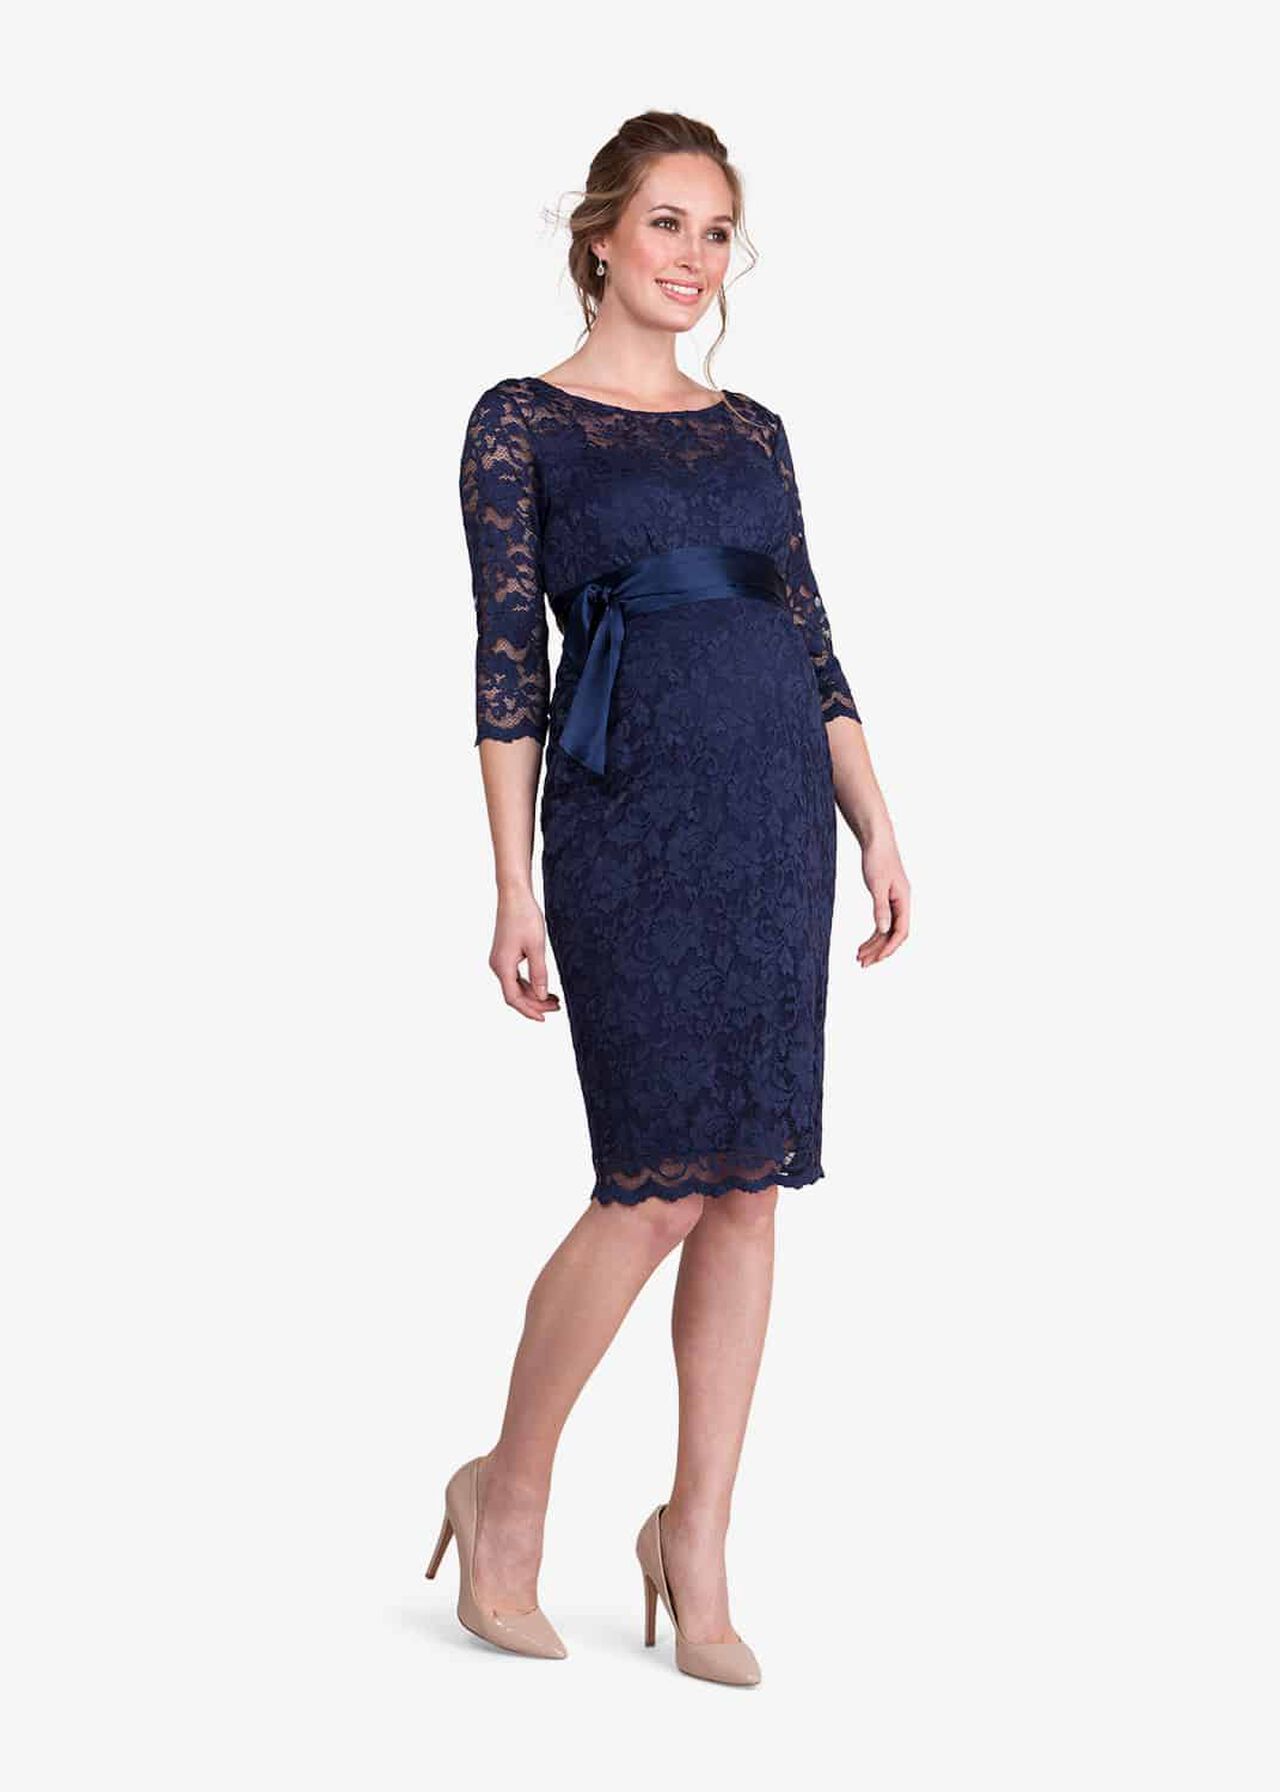 Seraphine Maternity Lace Cocktail Dress